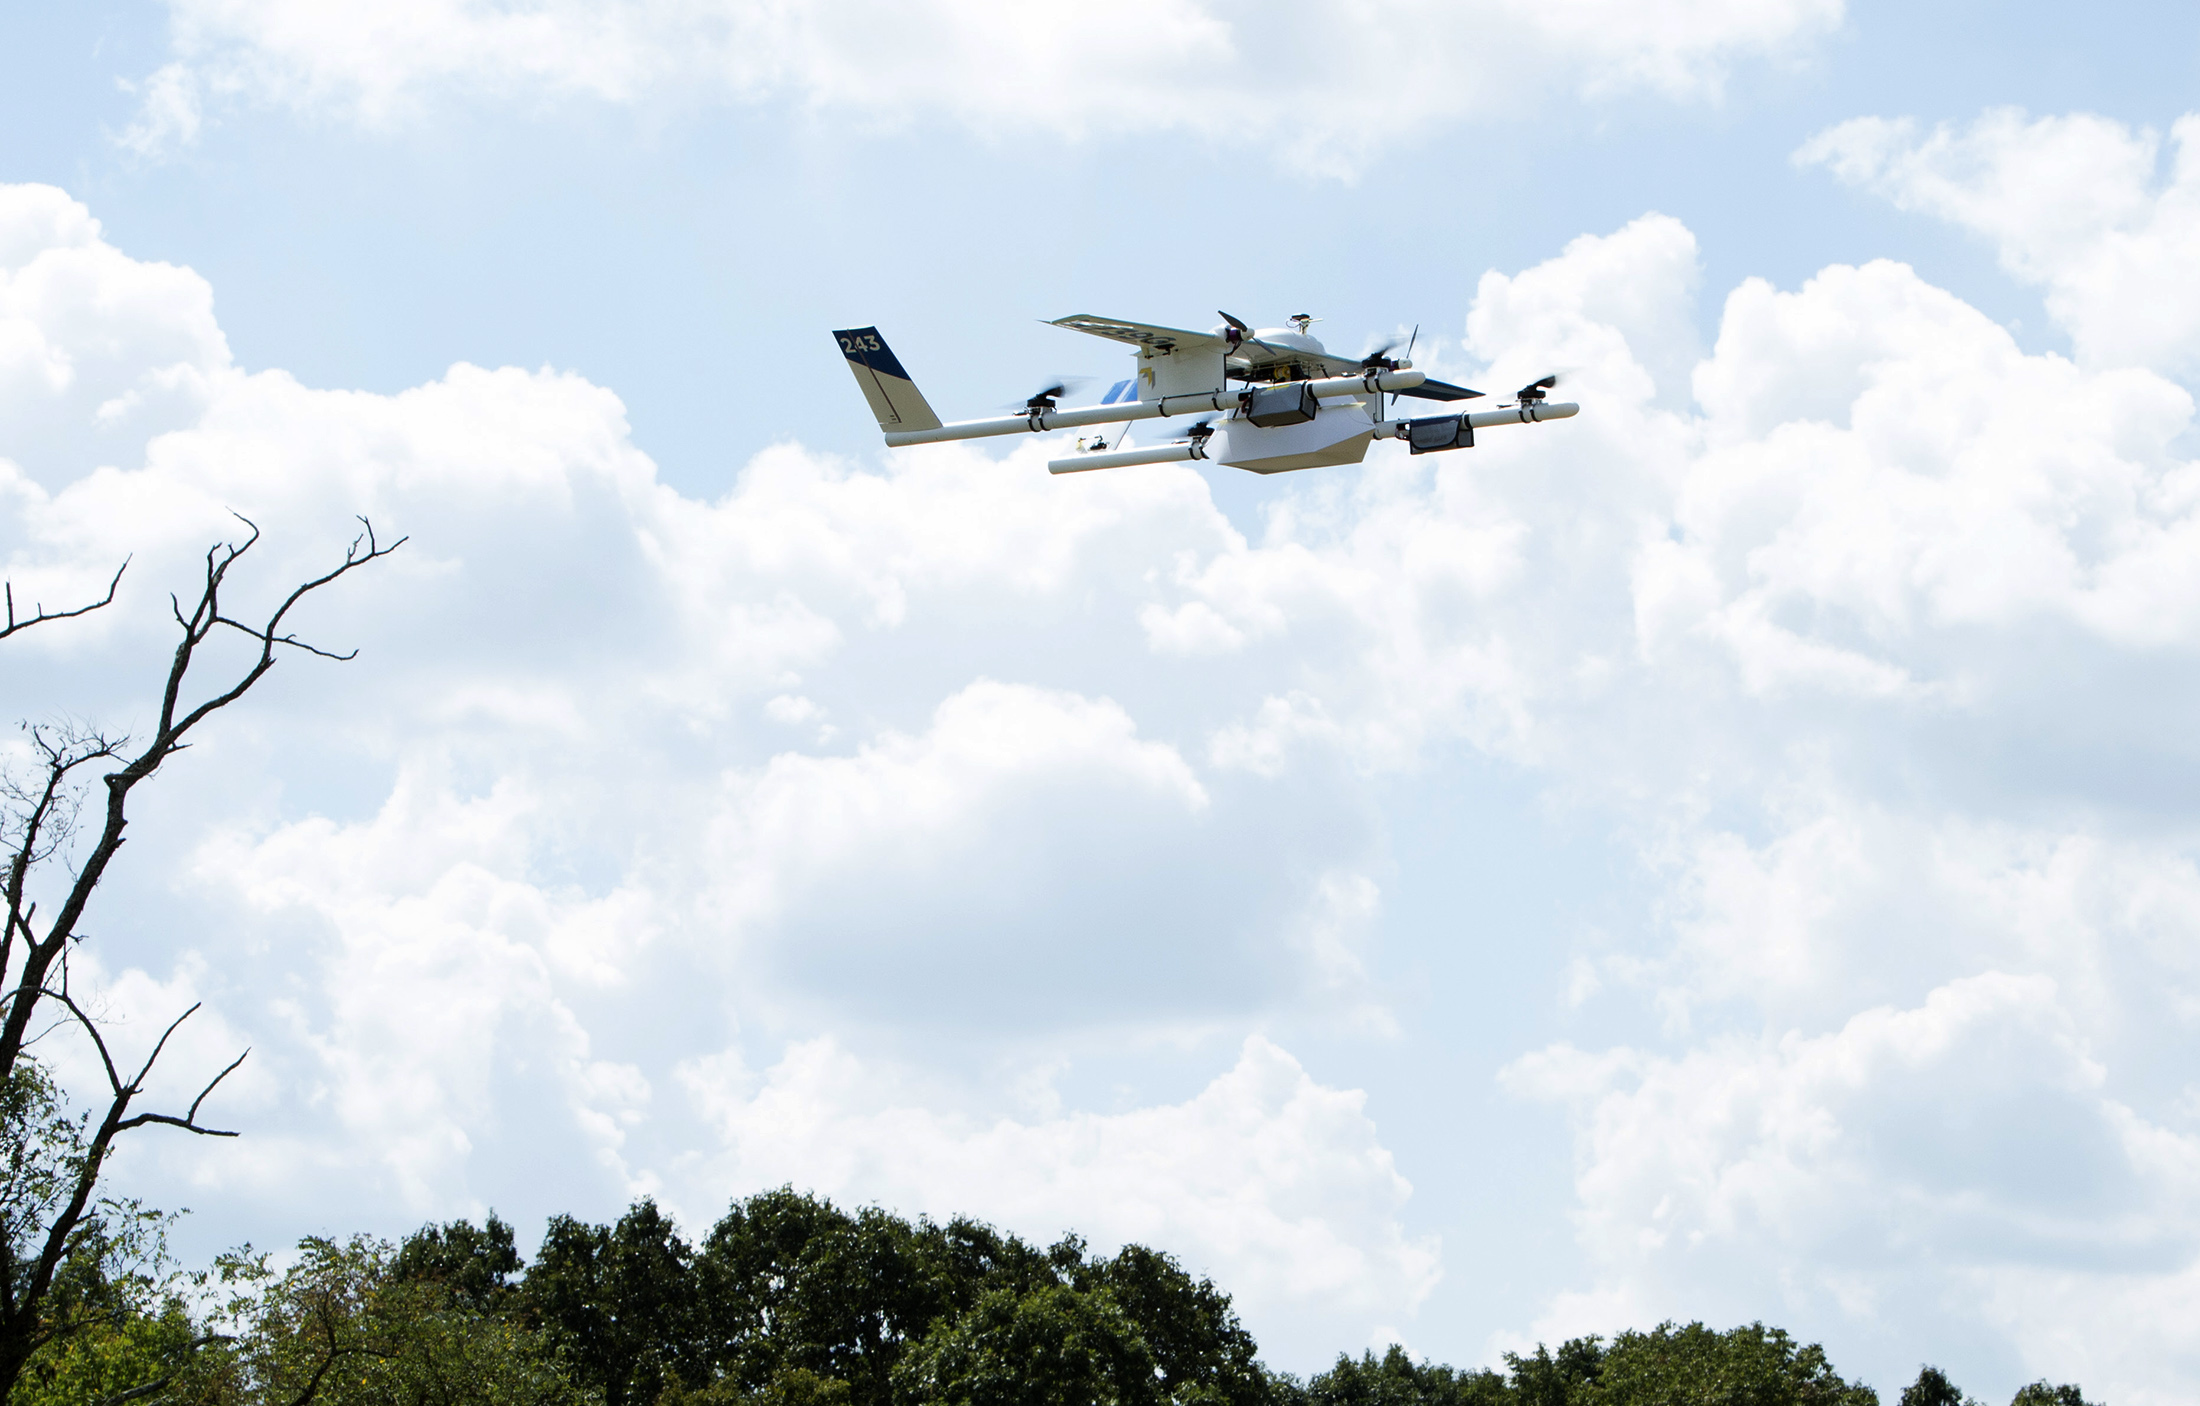 Financial scrutiny reportedly puts Project Wing drone initiative in holding pattern